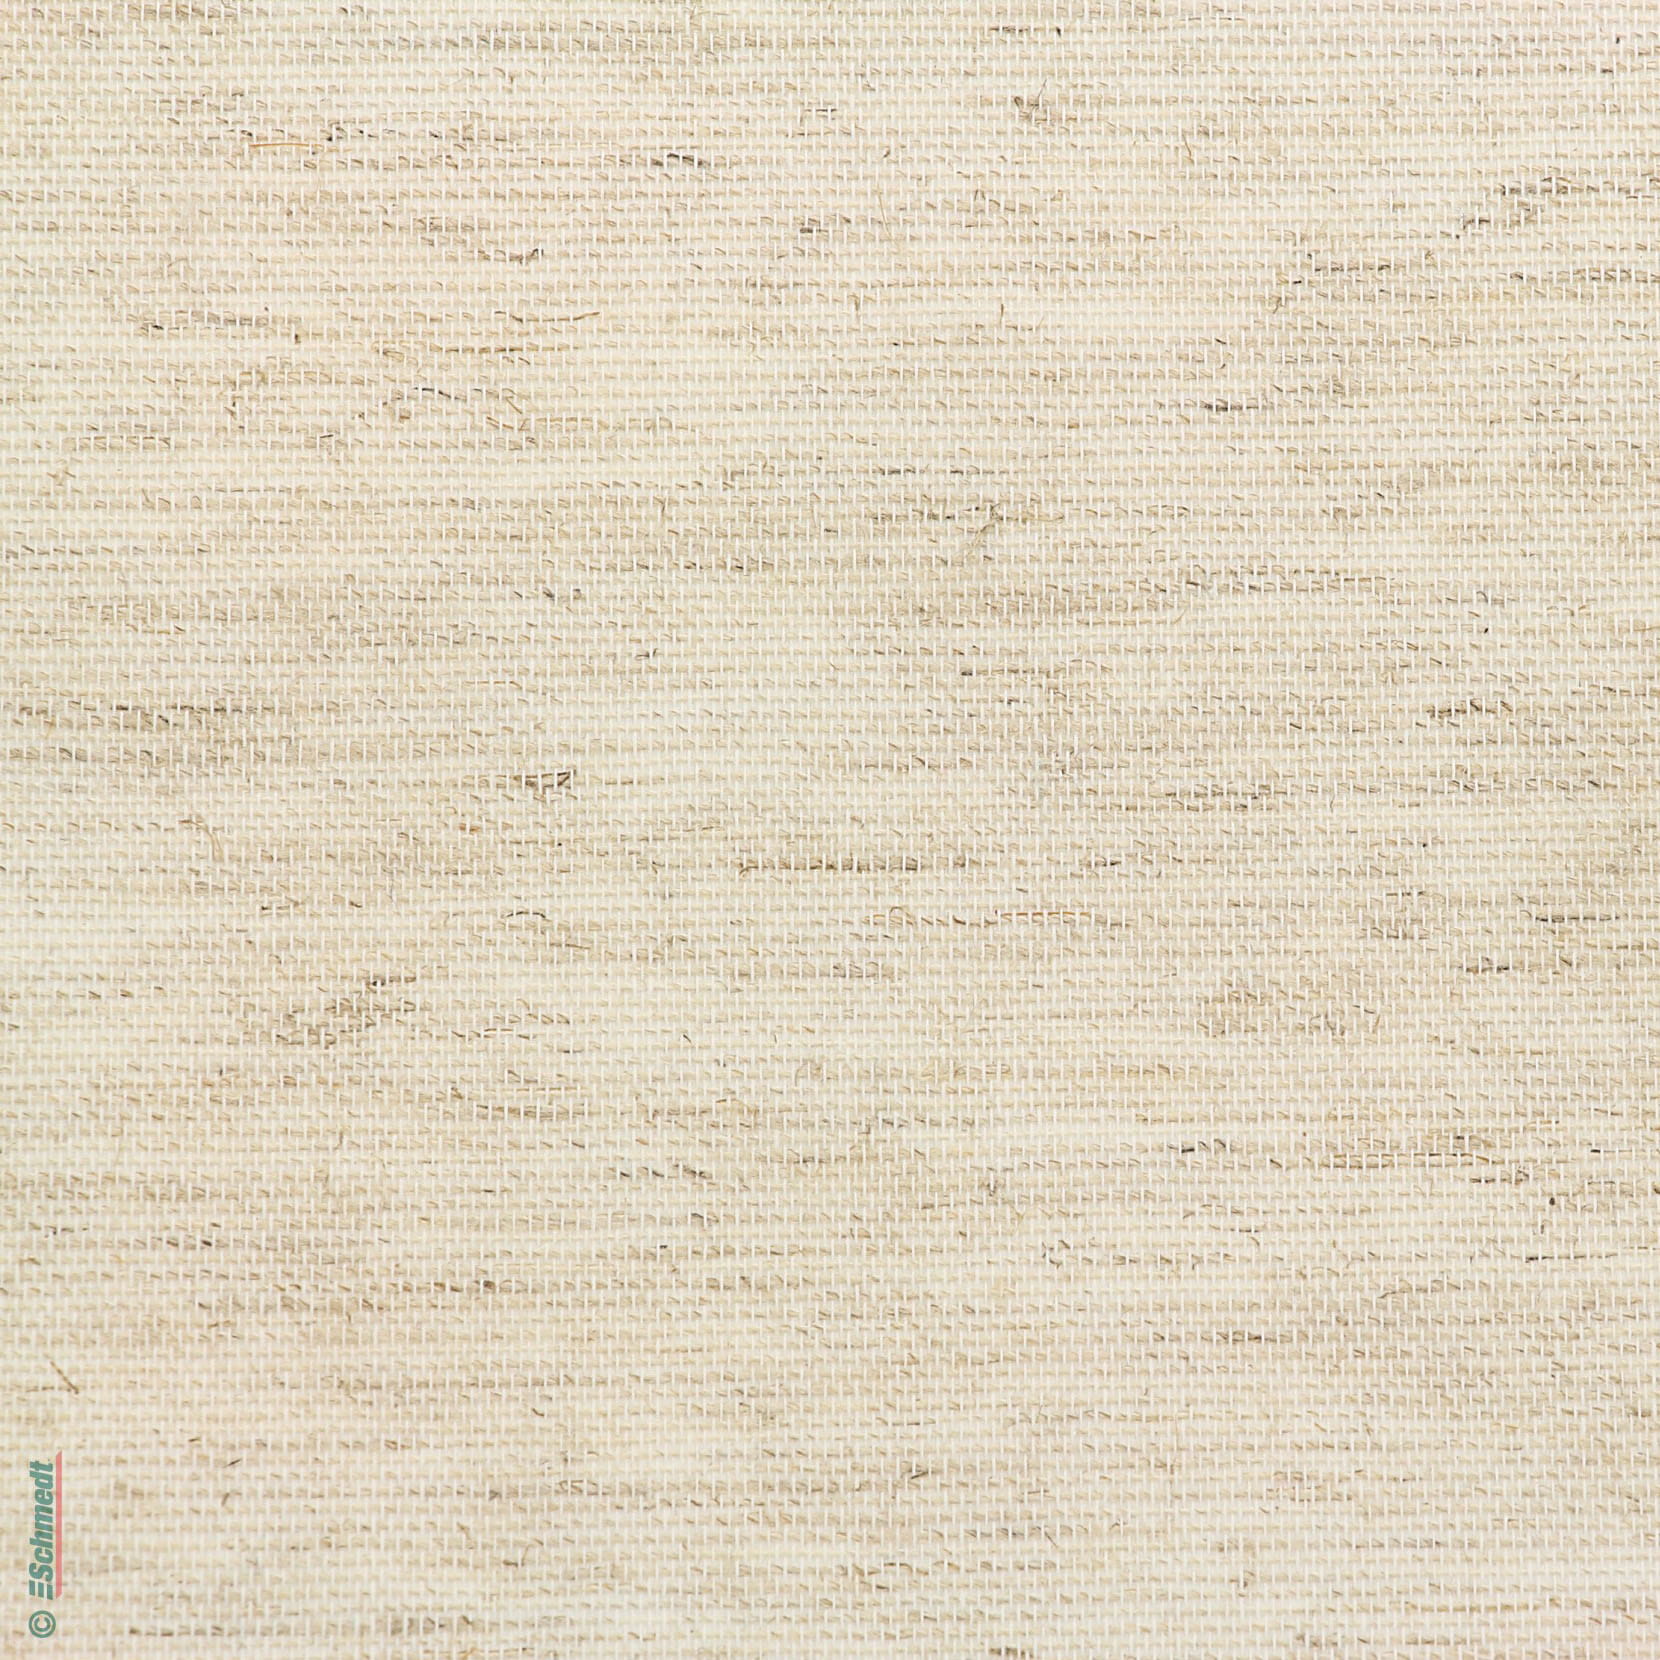 Beige Book Cloth: 1 Remnant Piece of Beige or Natural Colored, Japanese  Paper-backed Bookcloth for Bookbinding 